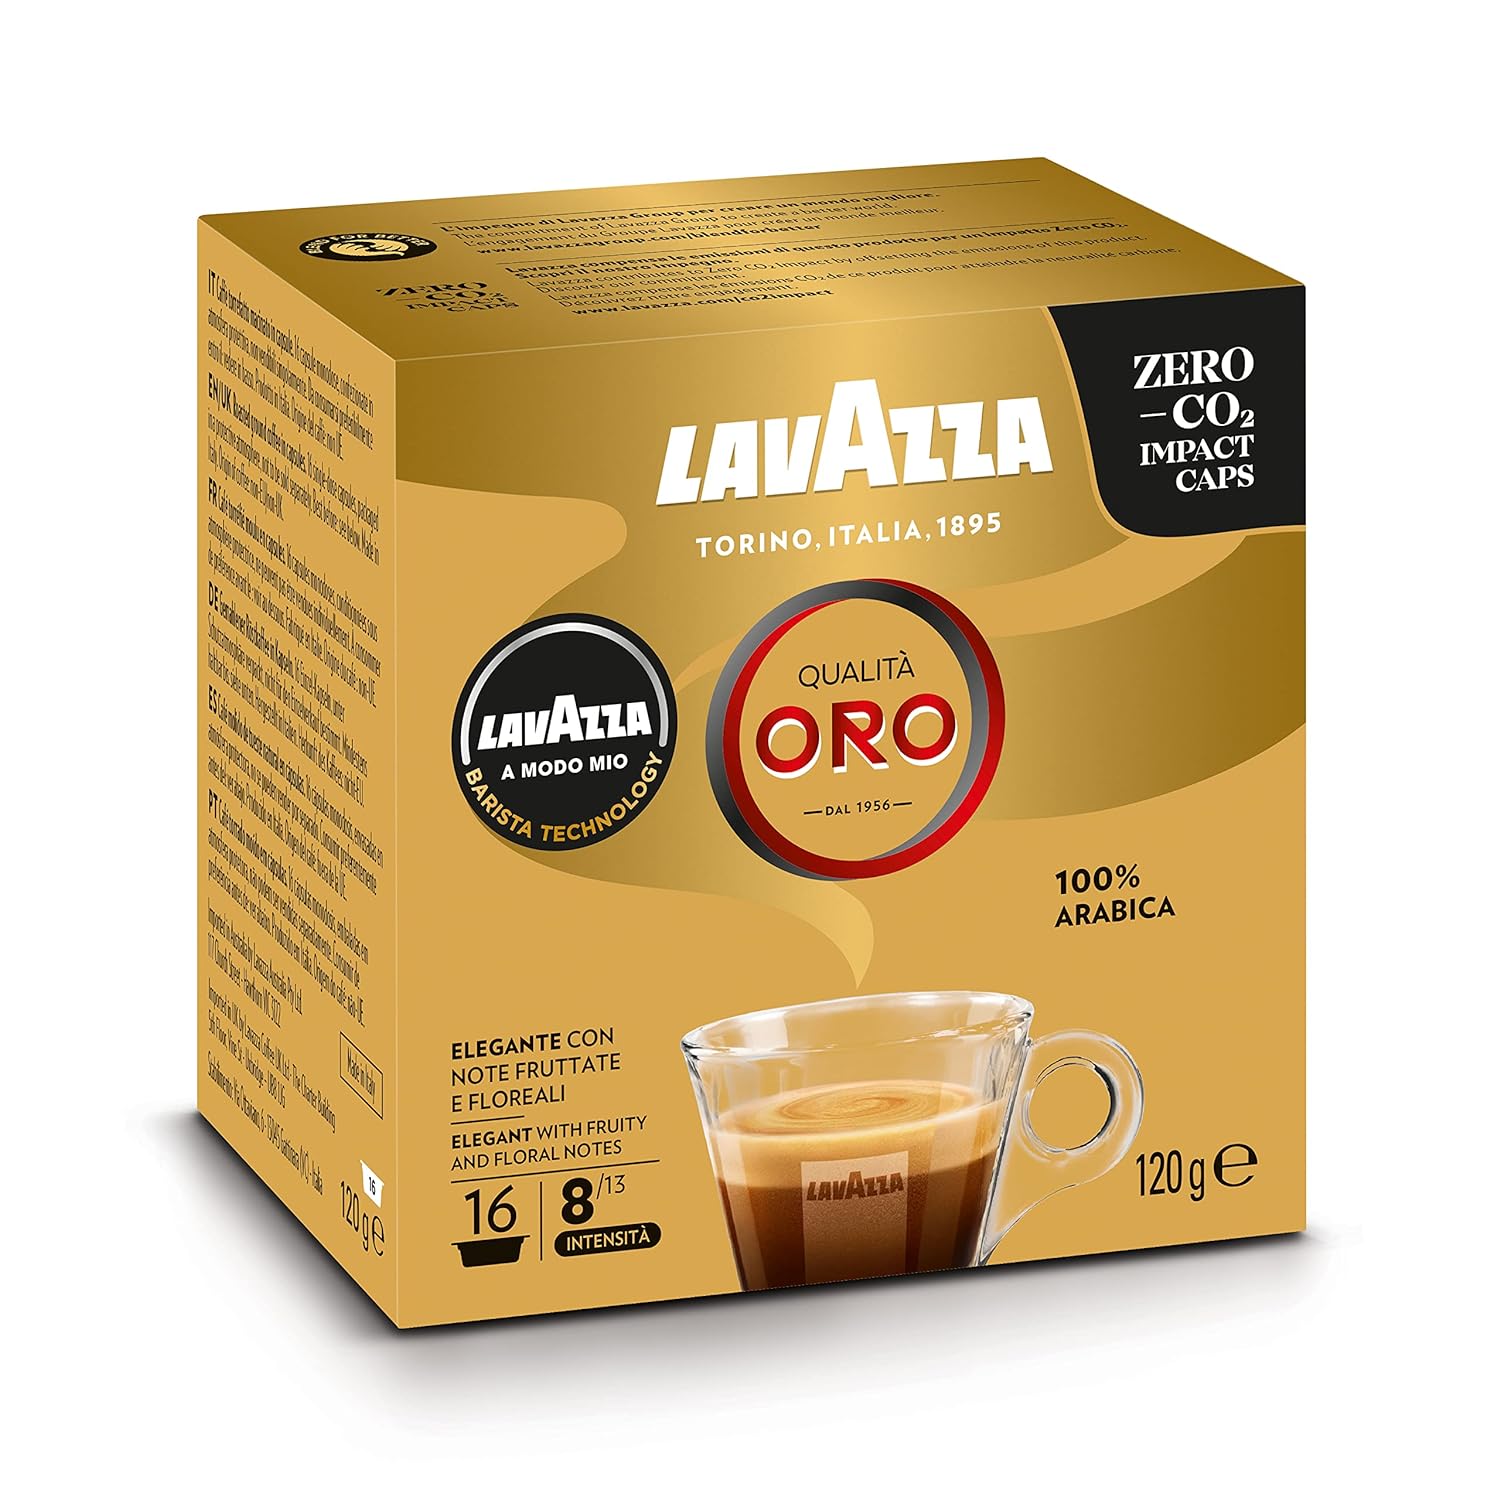 Lavazza, A Modo Mio Qualità Oro, 1 Pack of 16 Coffee Capsules, Ideal for an Espresso with Floral and Fruity Notes, 100% Arabica, Intensity 8/13, Medium Roast